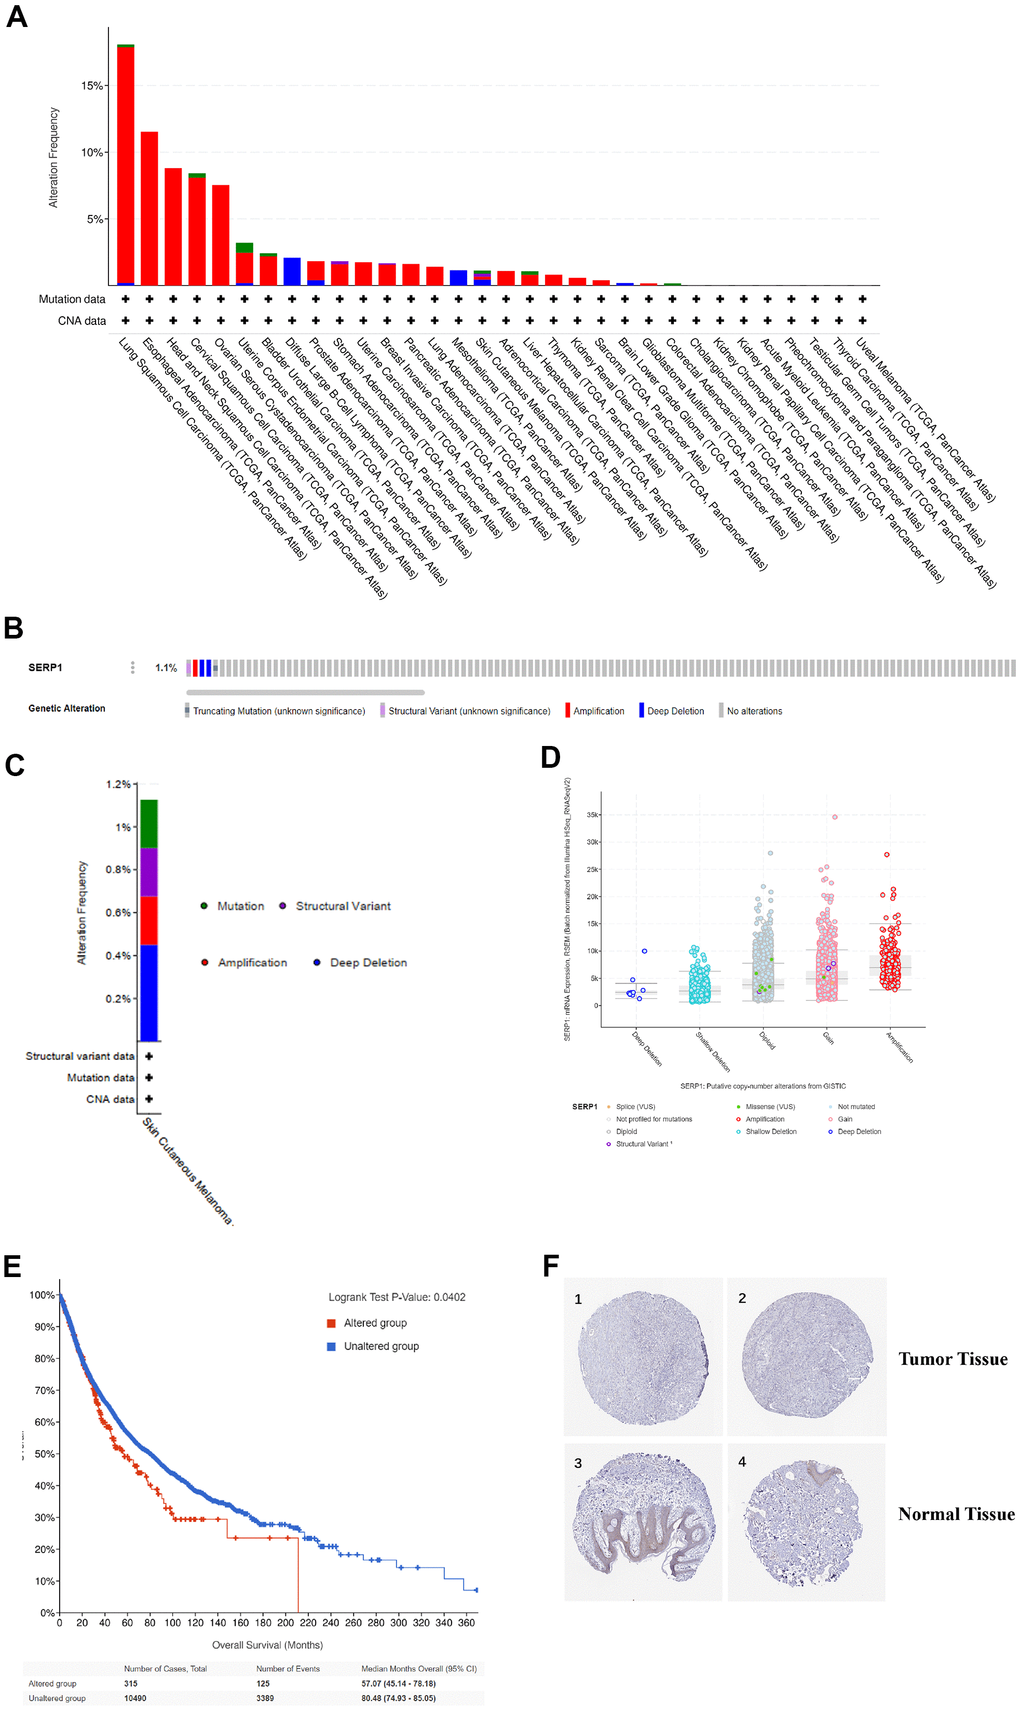 Genetic alteration and protein localization of SERP1 in SKCM patients. (A) Bar chart of SERP1 mutation in pan-cancers based on TCGA database. (B) SERP1 gene expression and mutation analysis in SKCM. (C) The distribution of SERP1 genomic alterations in SKCM. (D) The graph of the correlation between SERP1 expression and copy number alterations in SKCM. (E) Kaplan-Meier curve of OS in SKCM patients with altered (red) and unaltered (blue) mRNA expression of the SERP1 gene. (F) The representative IHC staining images from HPA database presents SERP1 expression in normal and tumor tissues.